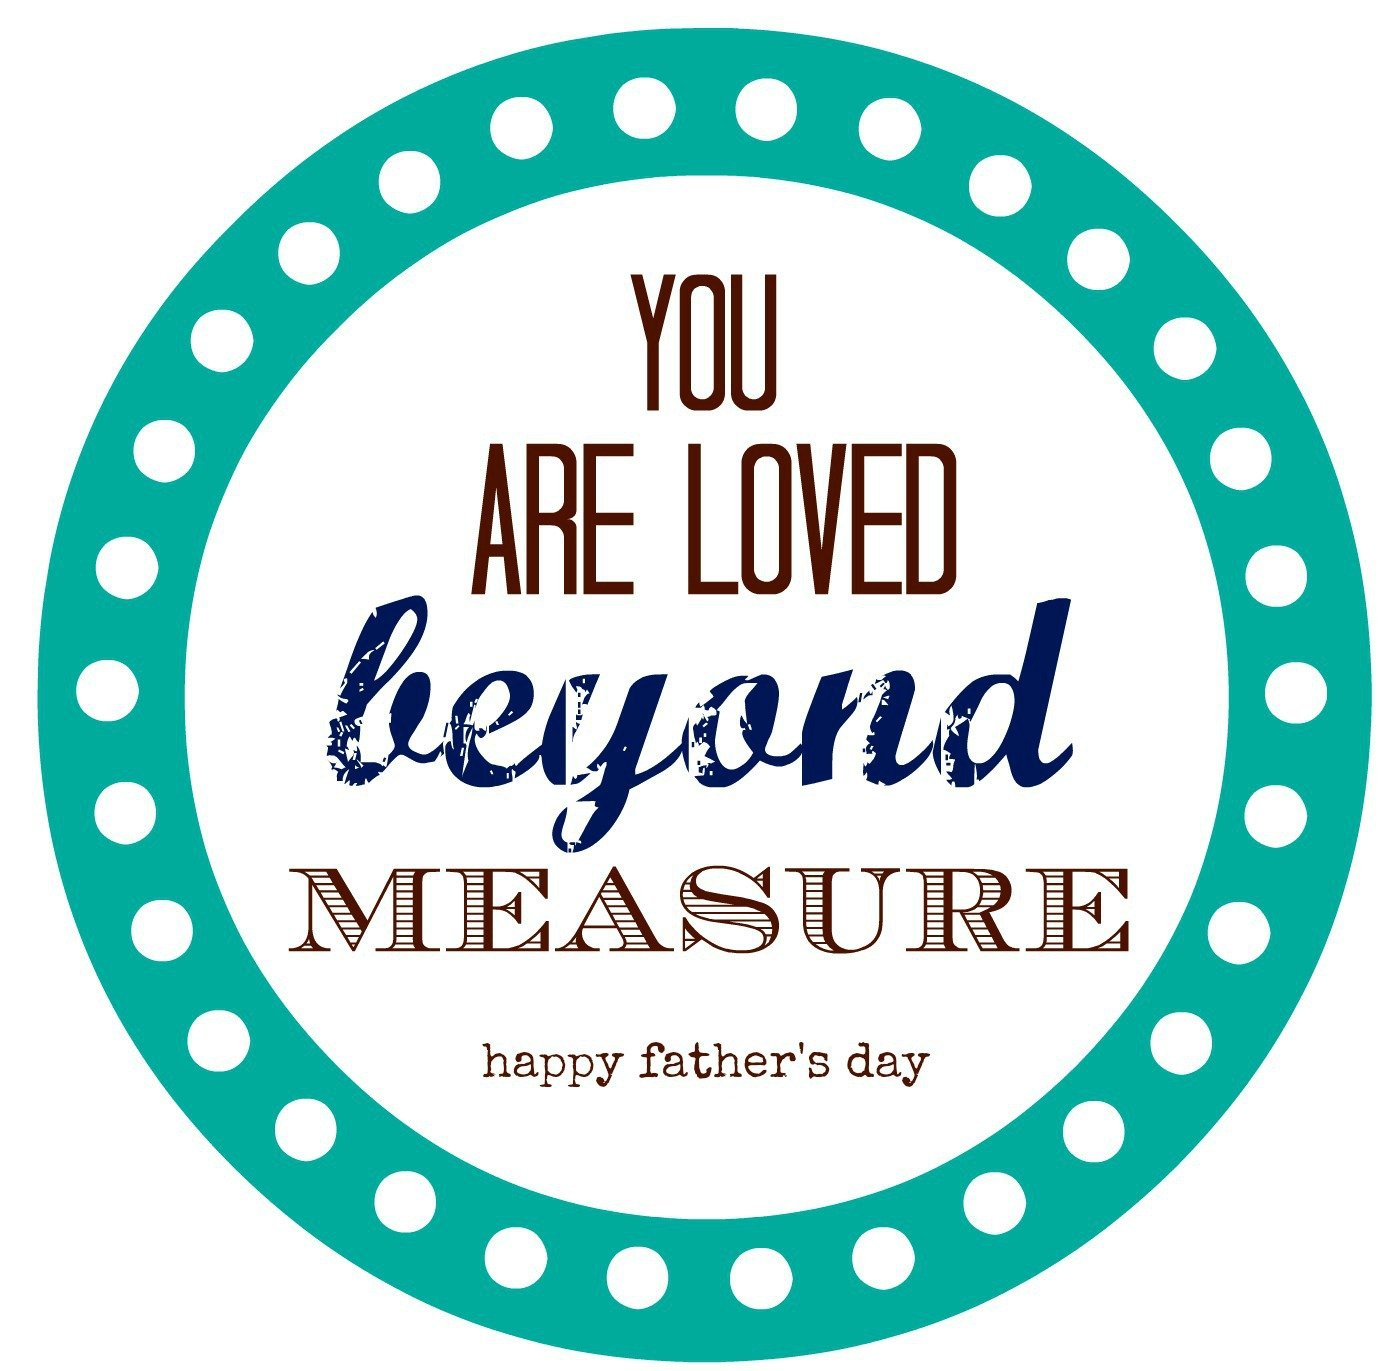 Father’s Day Measuring Tape Gifts {FREE PRINTABLE}